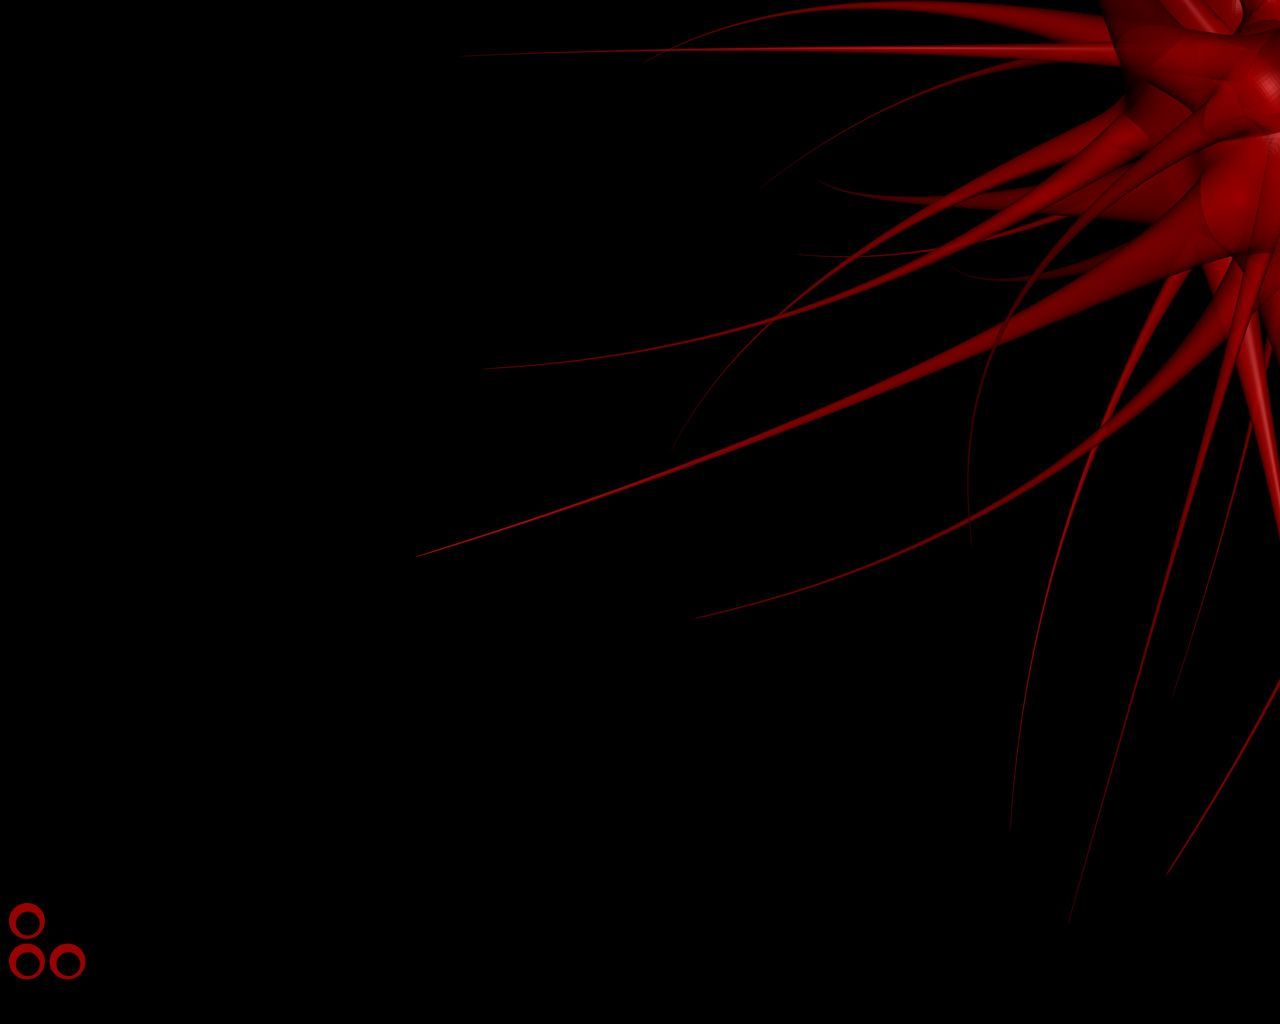 Black And Red Abstract Wallpaper 28 - [1280x1024]